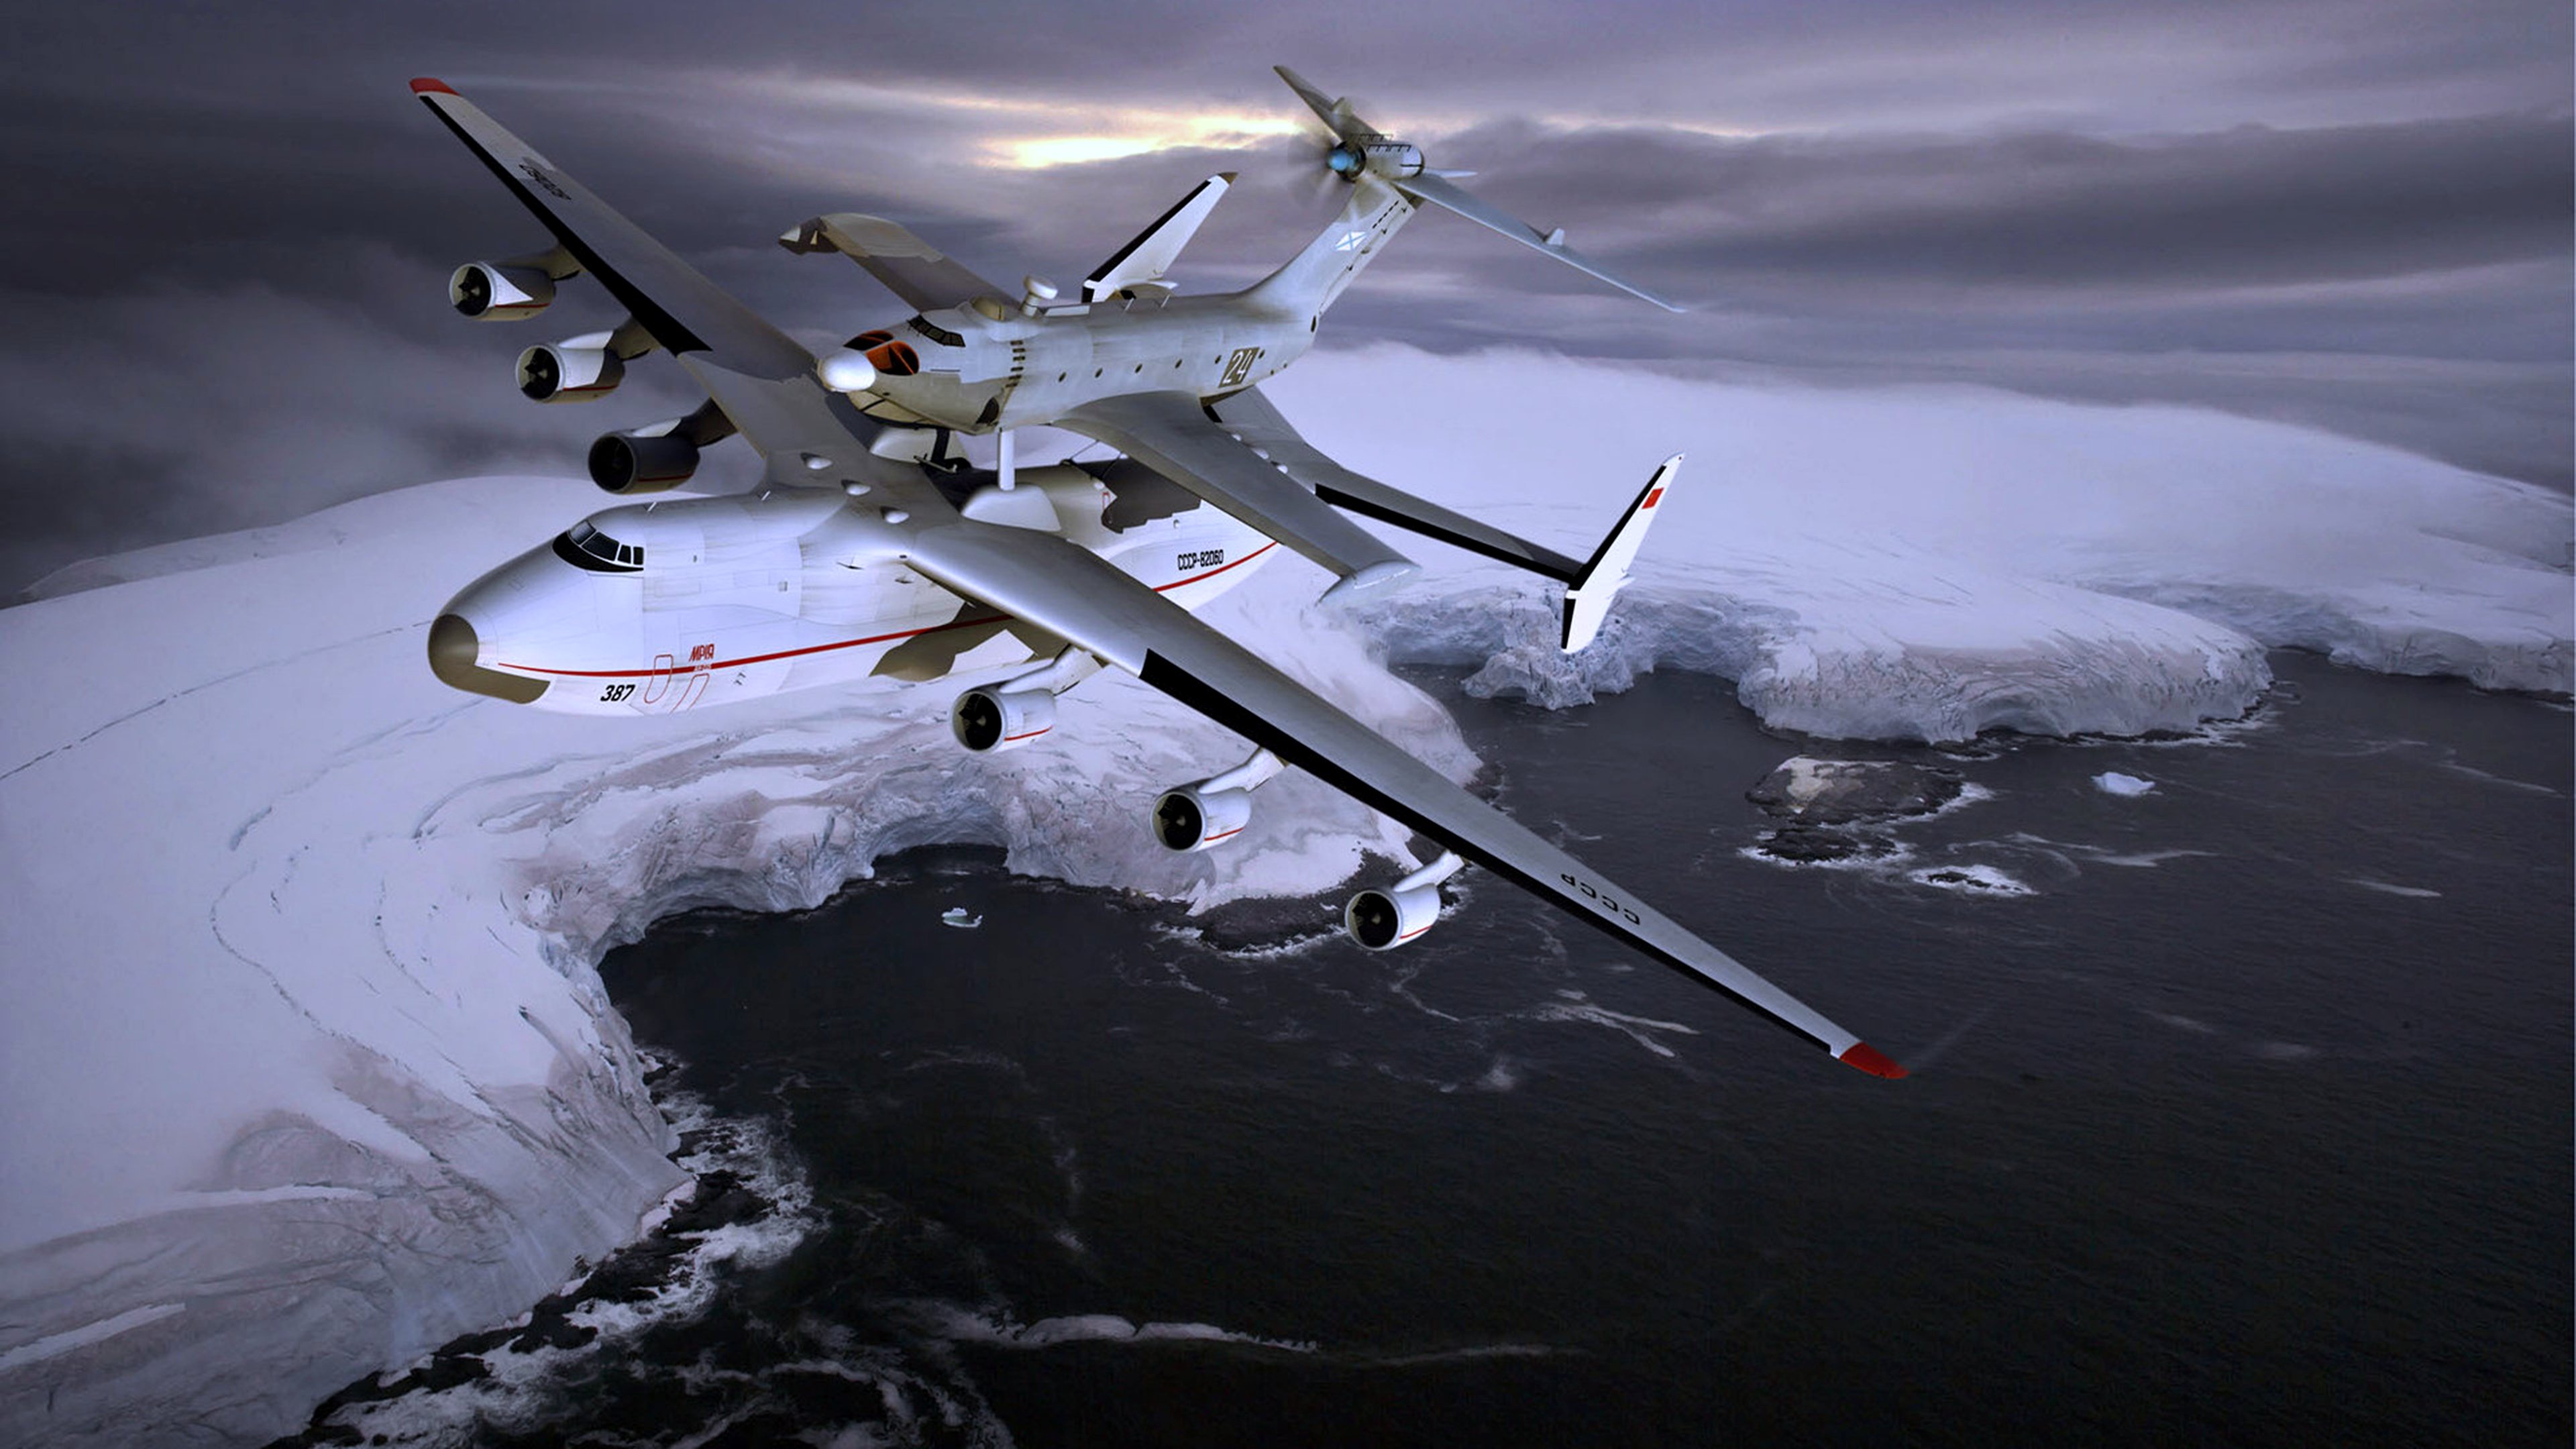 aircrafts, Attack, Snow, Ice, Sea, Clouds, Earth, Flights, Landscapes, Military, Nature, Review, Sky, Warplanes Wallpaper